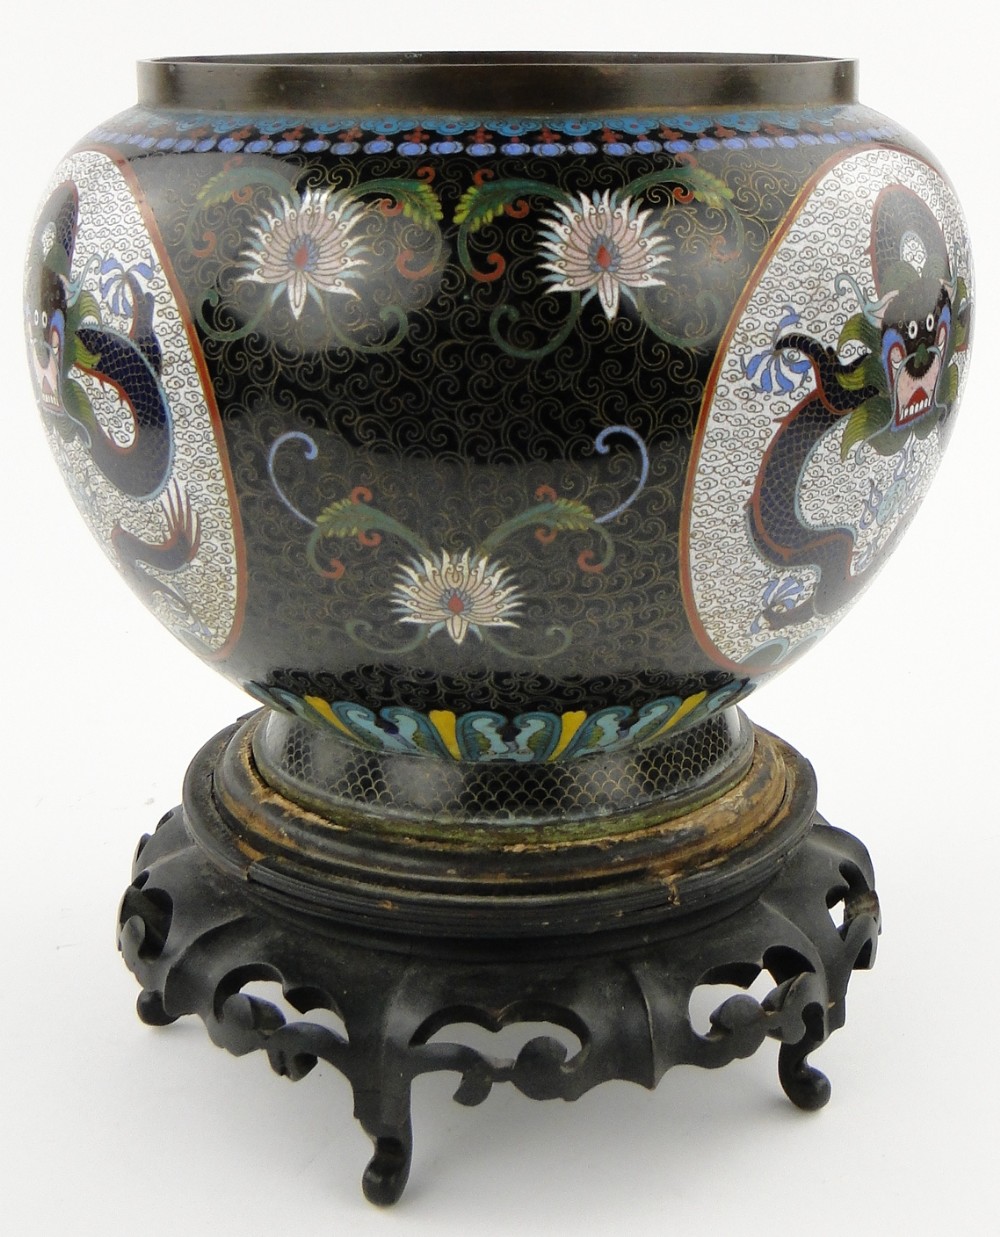 A black ground Cloisonne bowl
with dragon decorated panels, height 9.5", on carved wood stand. - Image 2 of 7